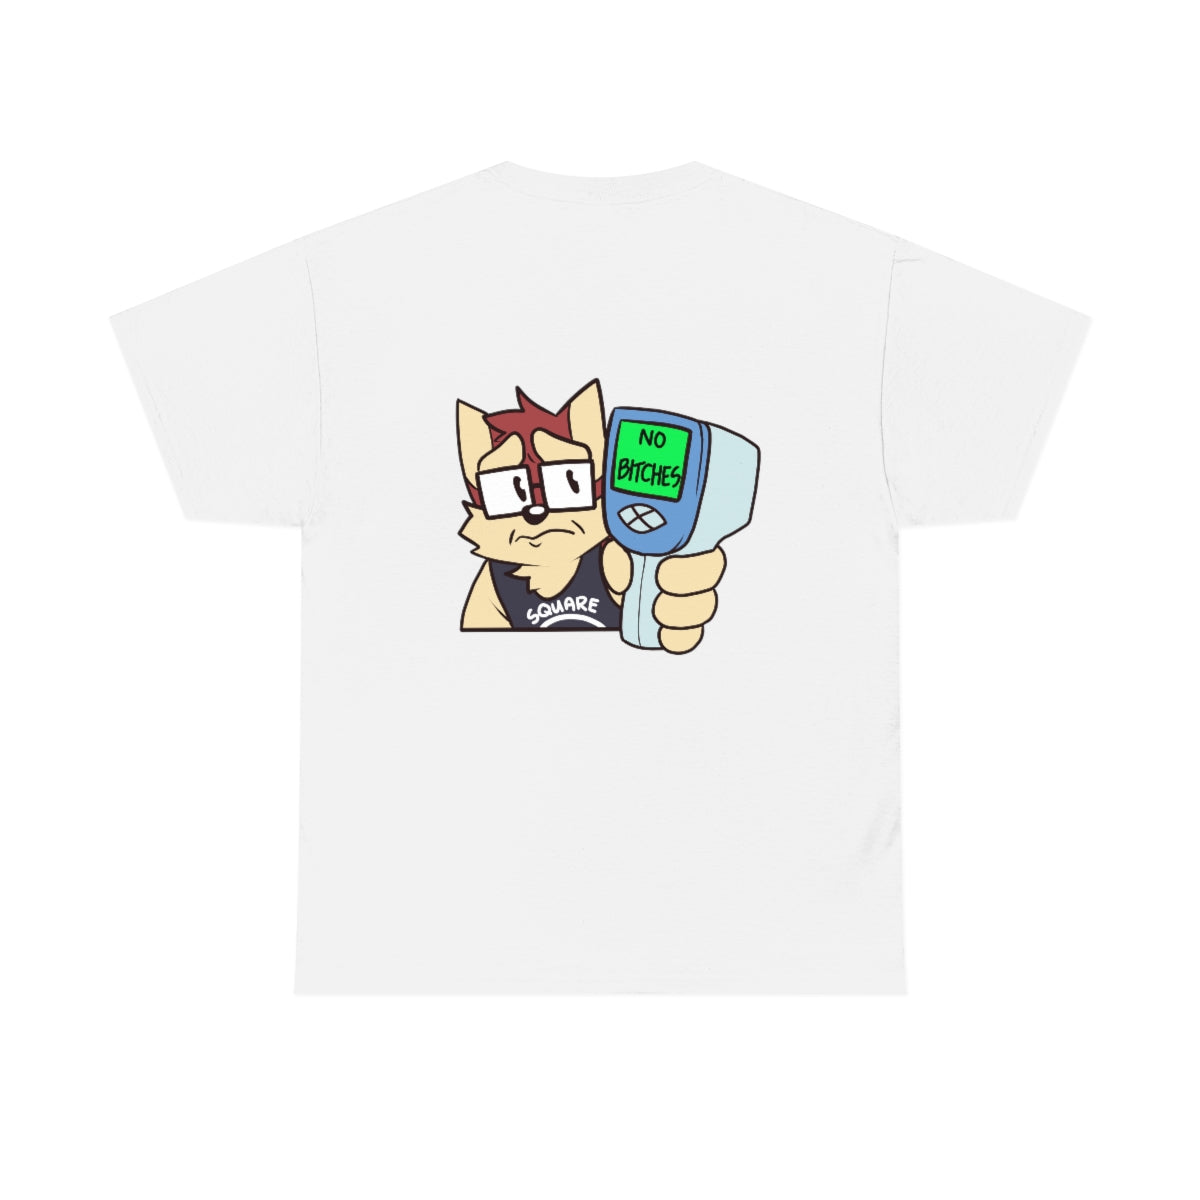 Let Me Scan You - T-Shirt (Double Sided Print) T-Shirt Ooka 